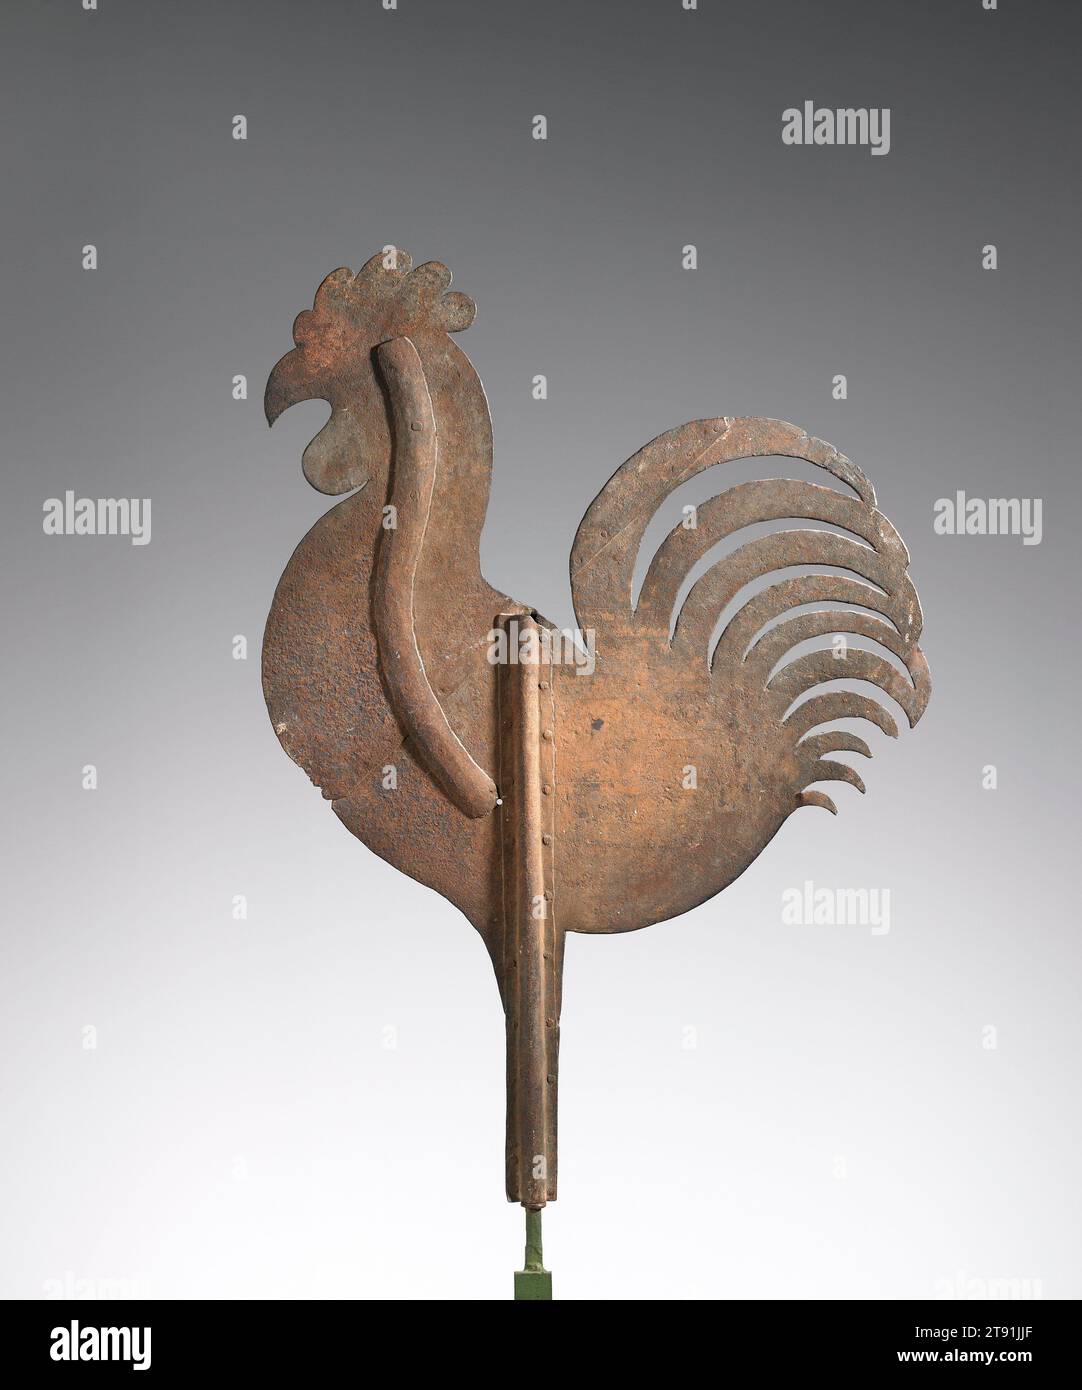 Rooster weathervane, c. 1860, 39 x 27 in. (99.06 x 68.58 cm), Iron, United States, 19th century, For townspeople of the 1700s and 1800s in America, reading the weather was simply a matter of looking up. Weathervanes graced the roofs of meeting halls and churches in the town center. Farmers and others who lived outside of town often made their own weathervanes. Early examples like this highly stylized rooster from Bucks County, Pennsylvania, were usually two-dimensional and hand cut from wood or sheet metal Stock Photo